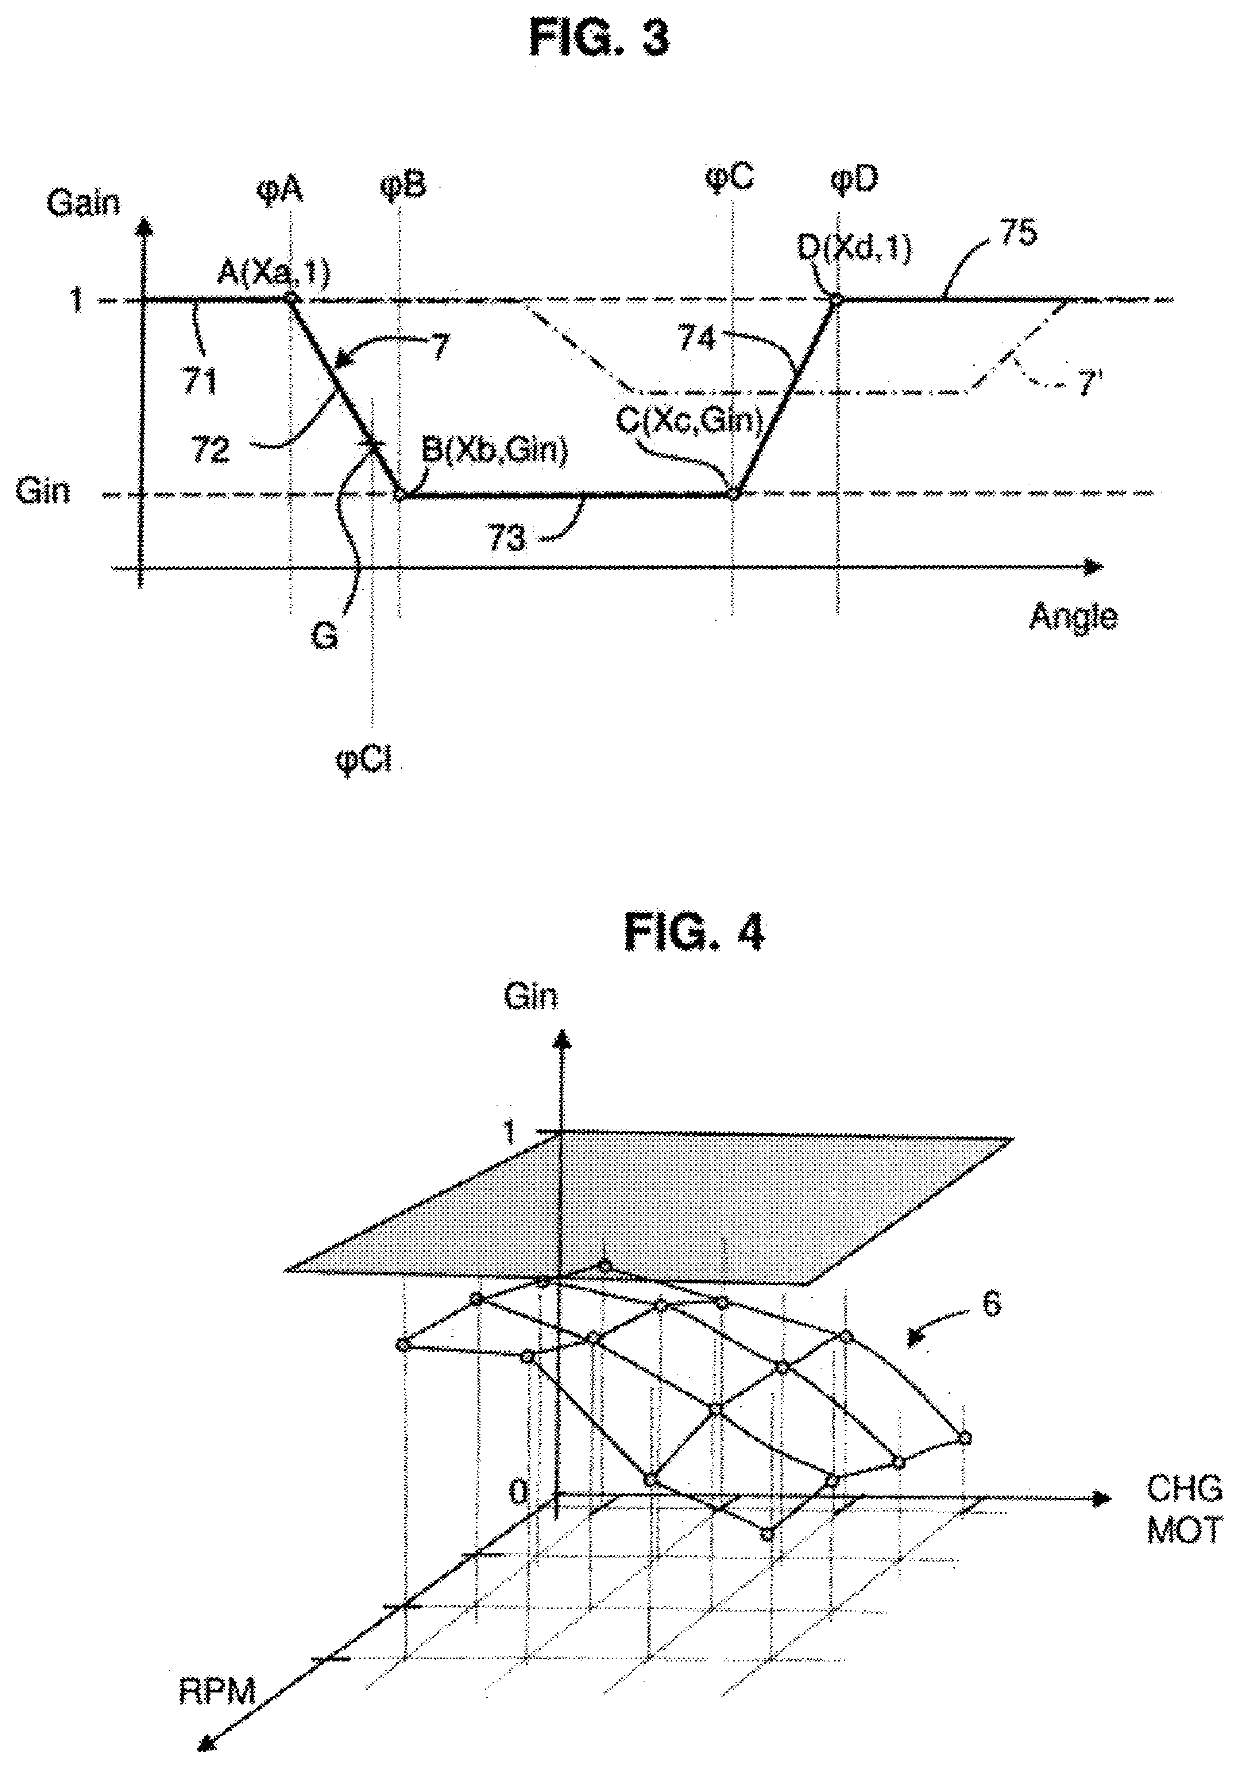 Method for managing pinking in a controlled-ignition internal combustion engine